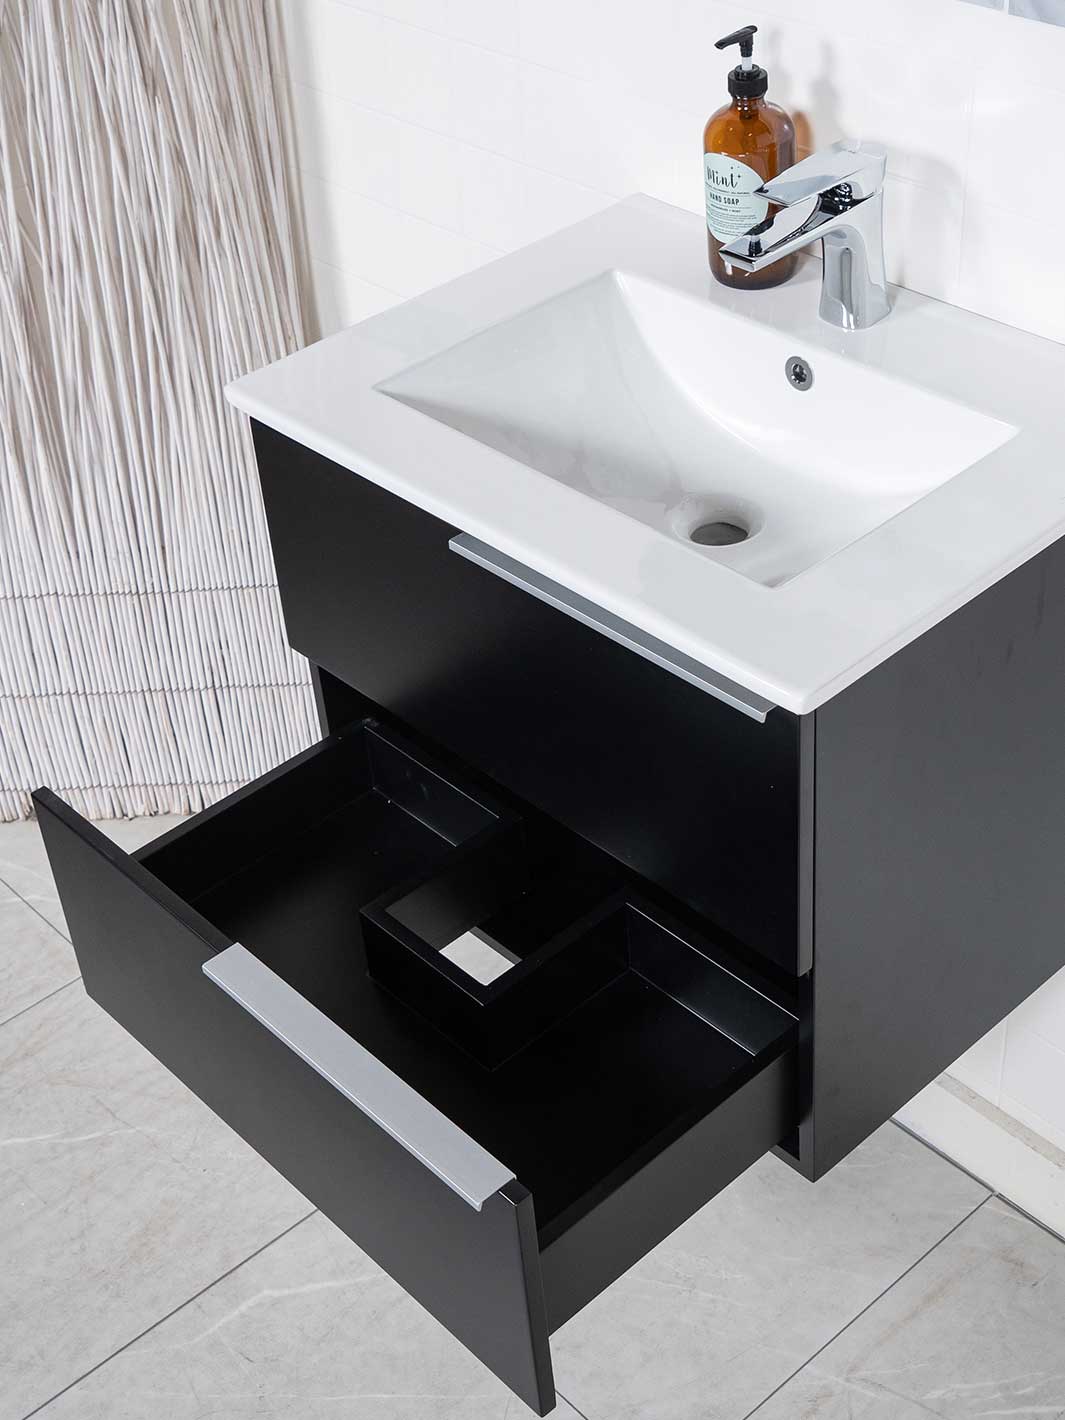 28 inch black floating vanity with bottom drawer open. White ceramic sink and chrome faucet.